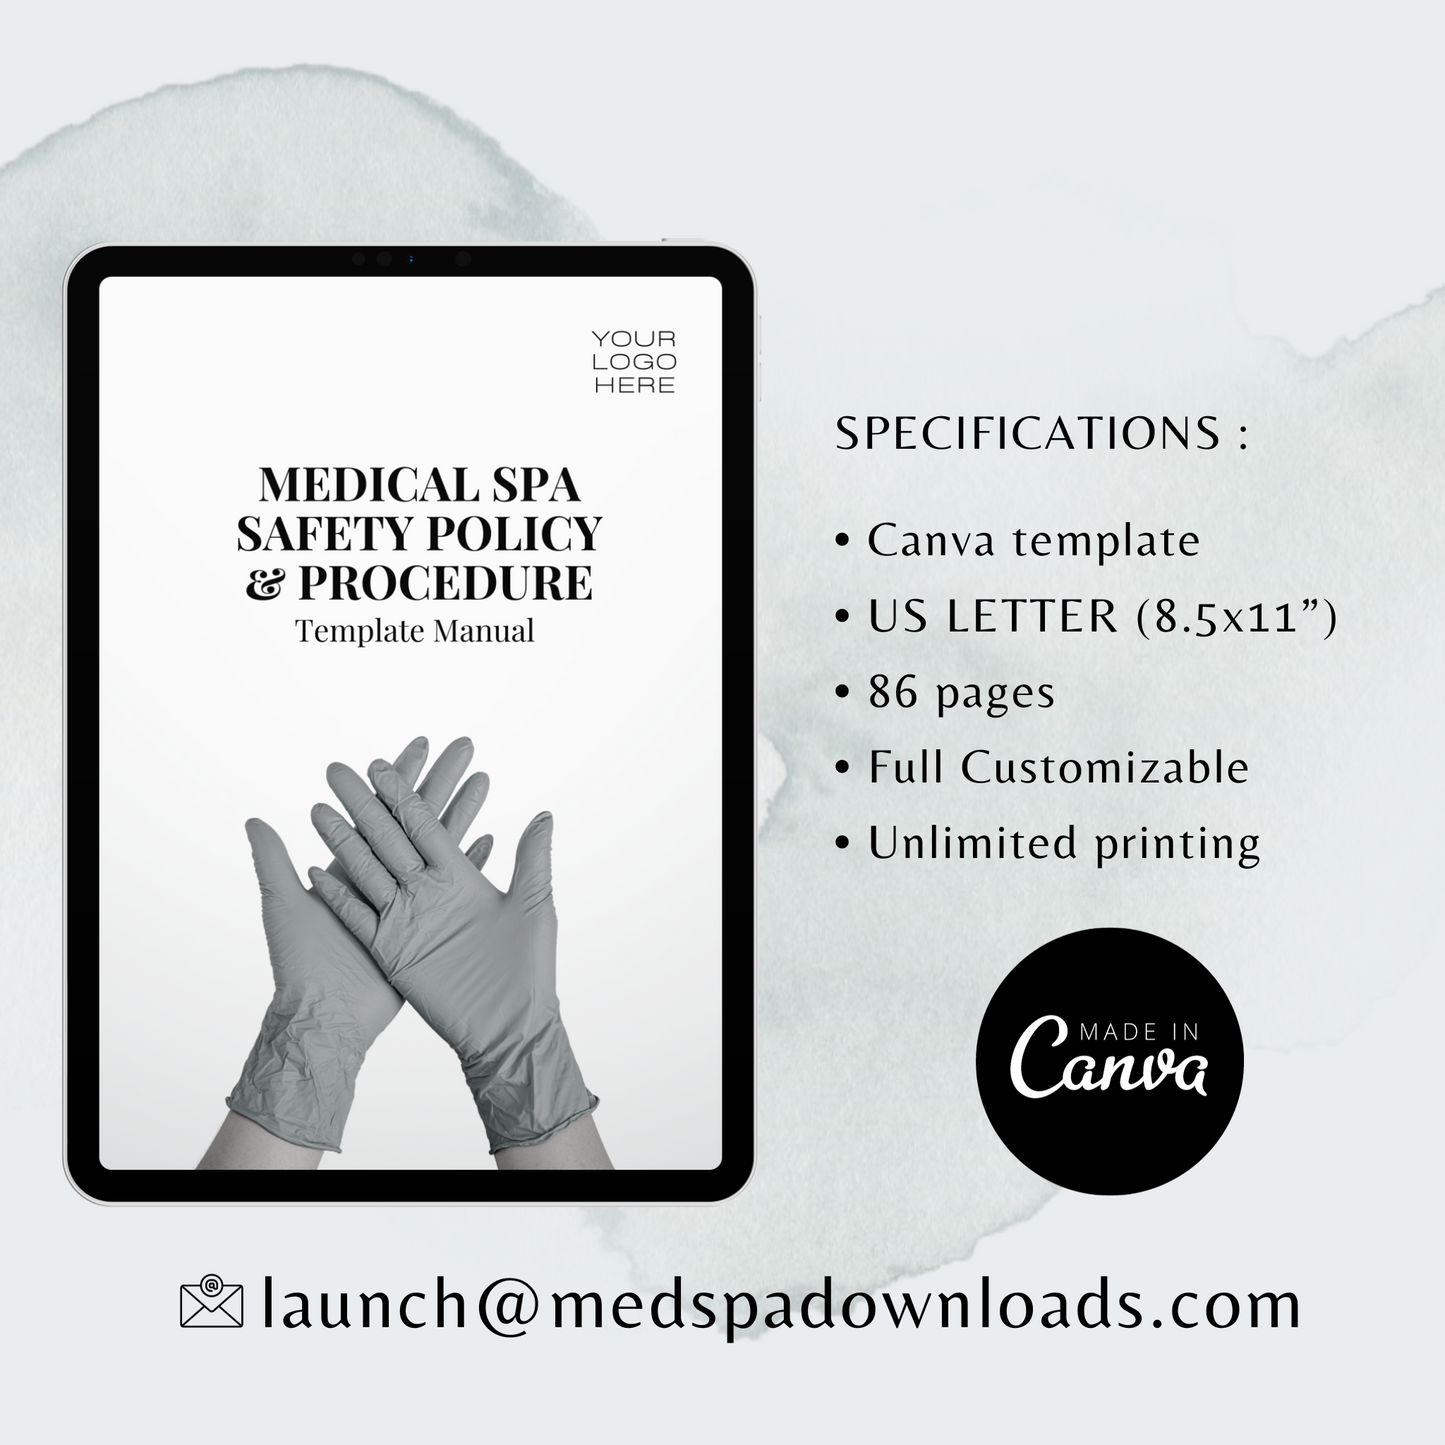 Medical Spa Safety Policies And Procedures Manual